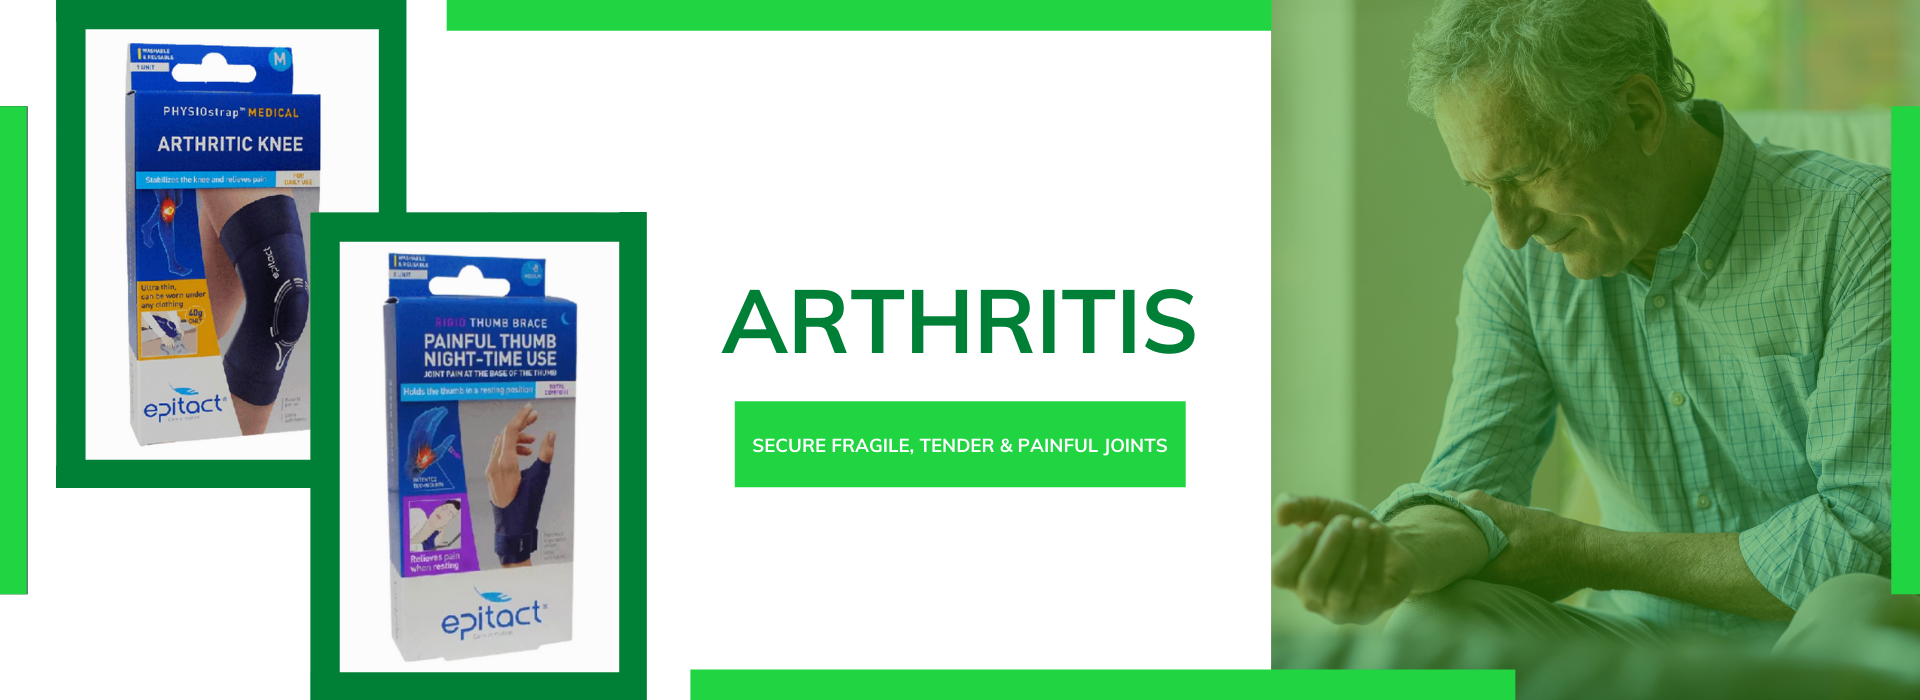 epitact arthritis supports stocked here